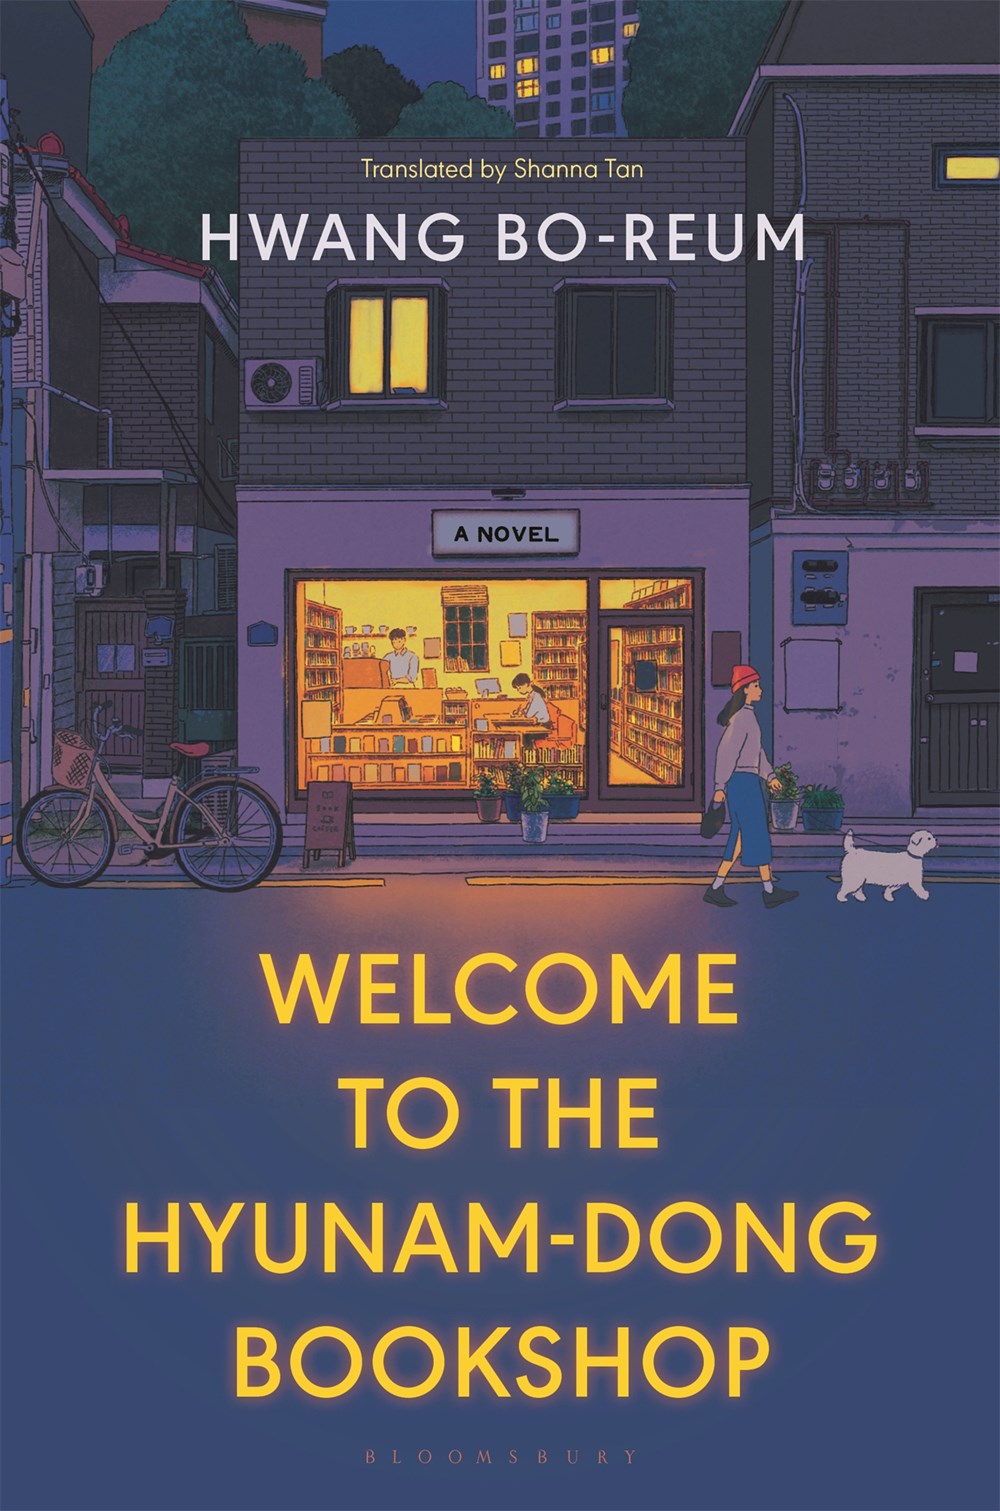 Welcome to Hyunam-dong Bookshop by Hwang Bo-reum